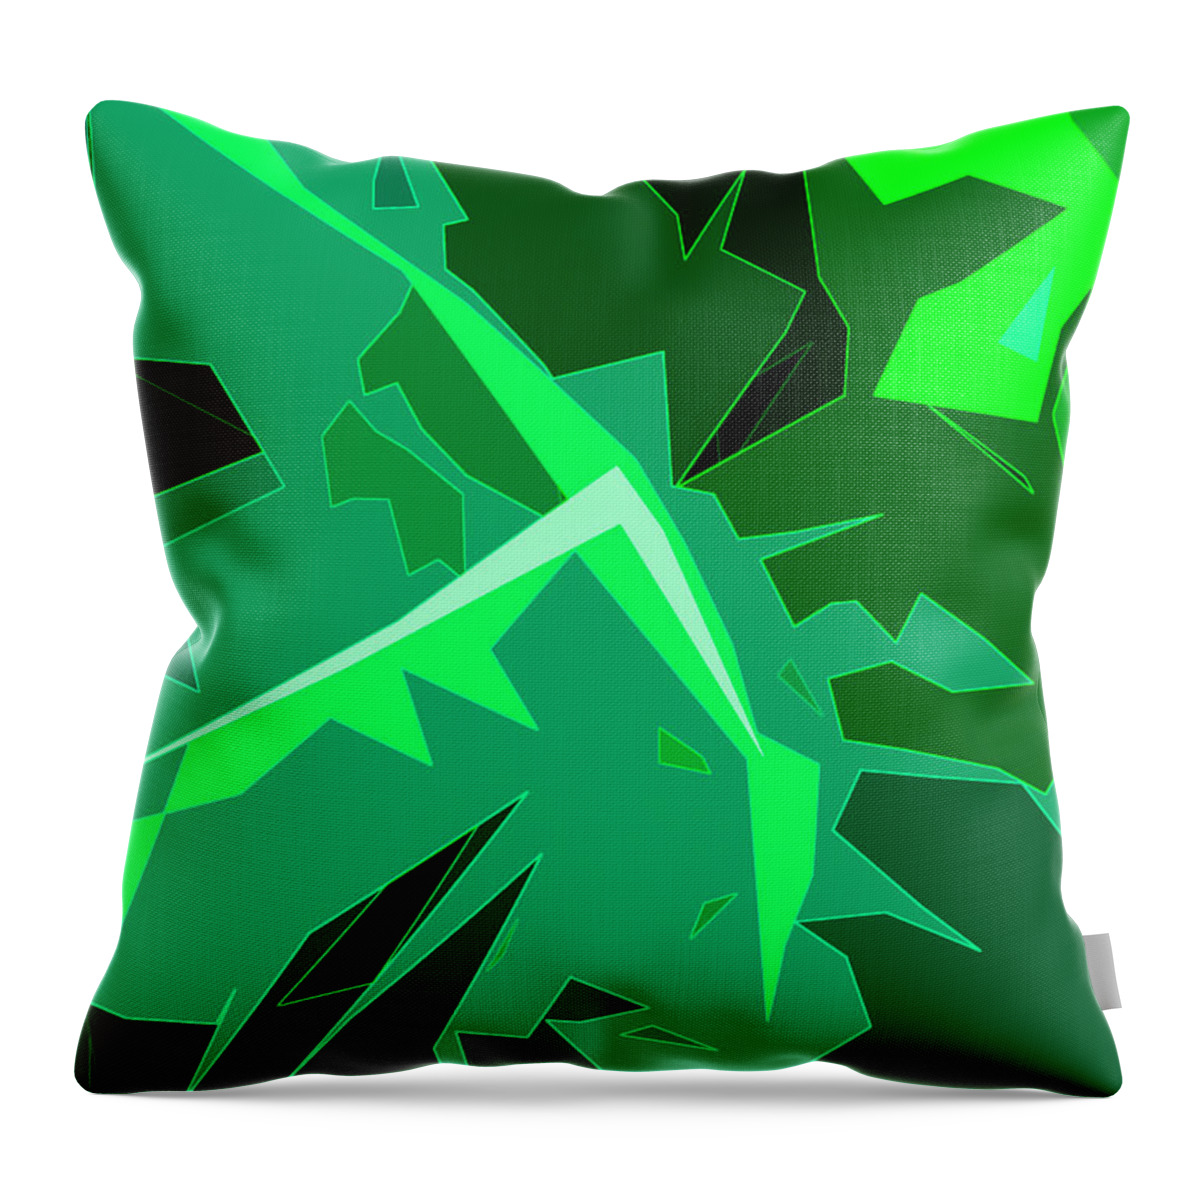 Foliage Throw Pillow featuring the digital art Grape Leaves by Gina Harrison